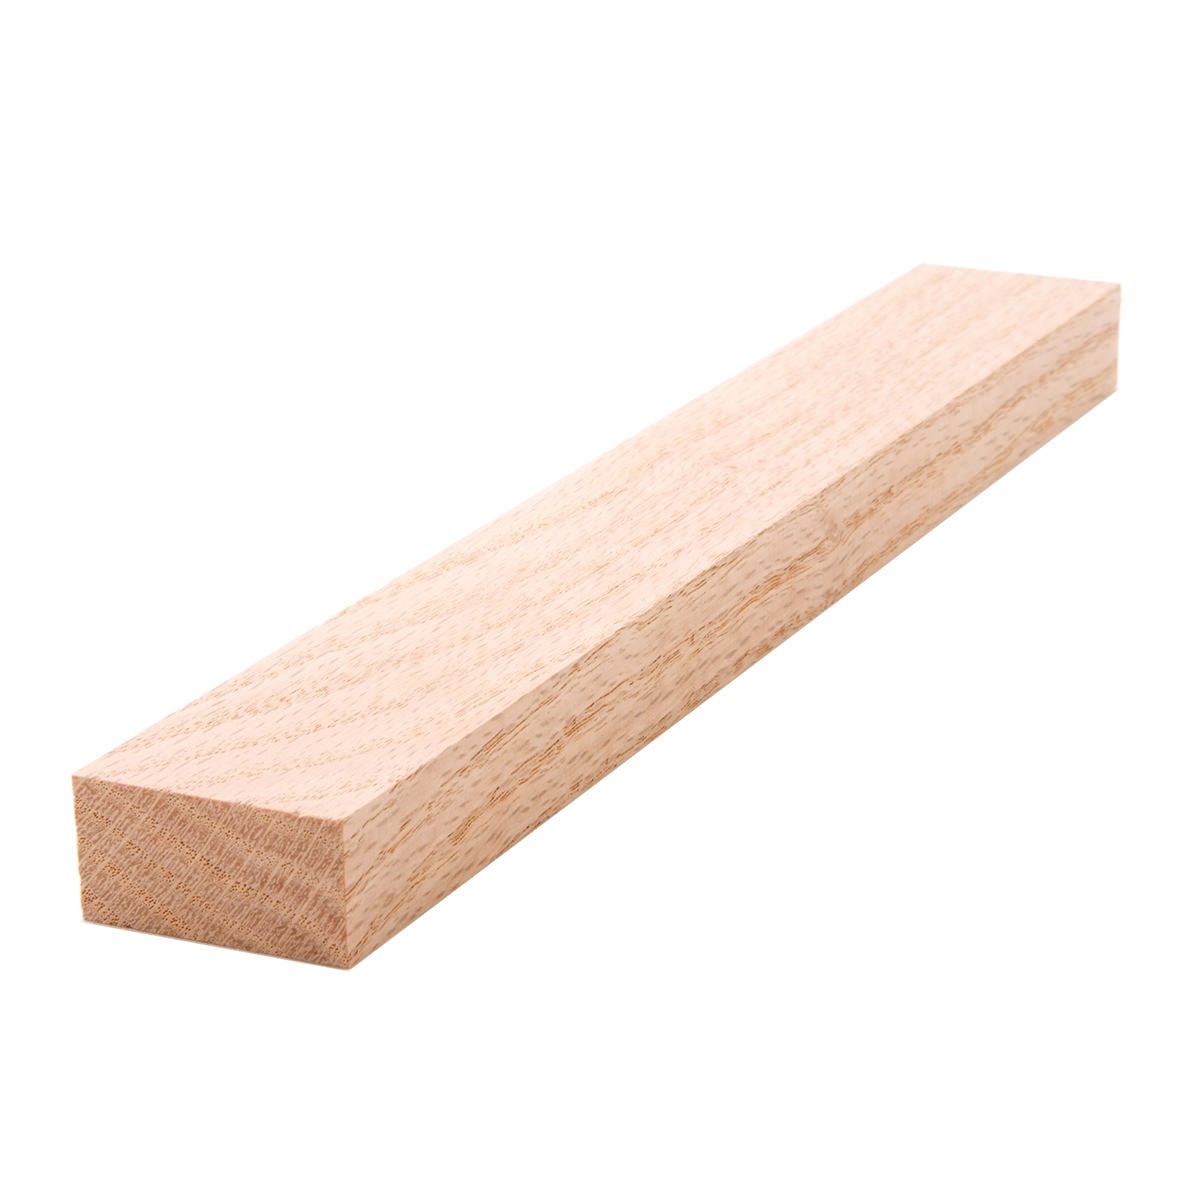 Solid Red Oak Boards- 3/4 Thick x 3 1/2 Wide